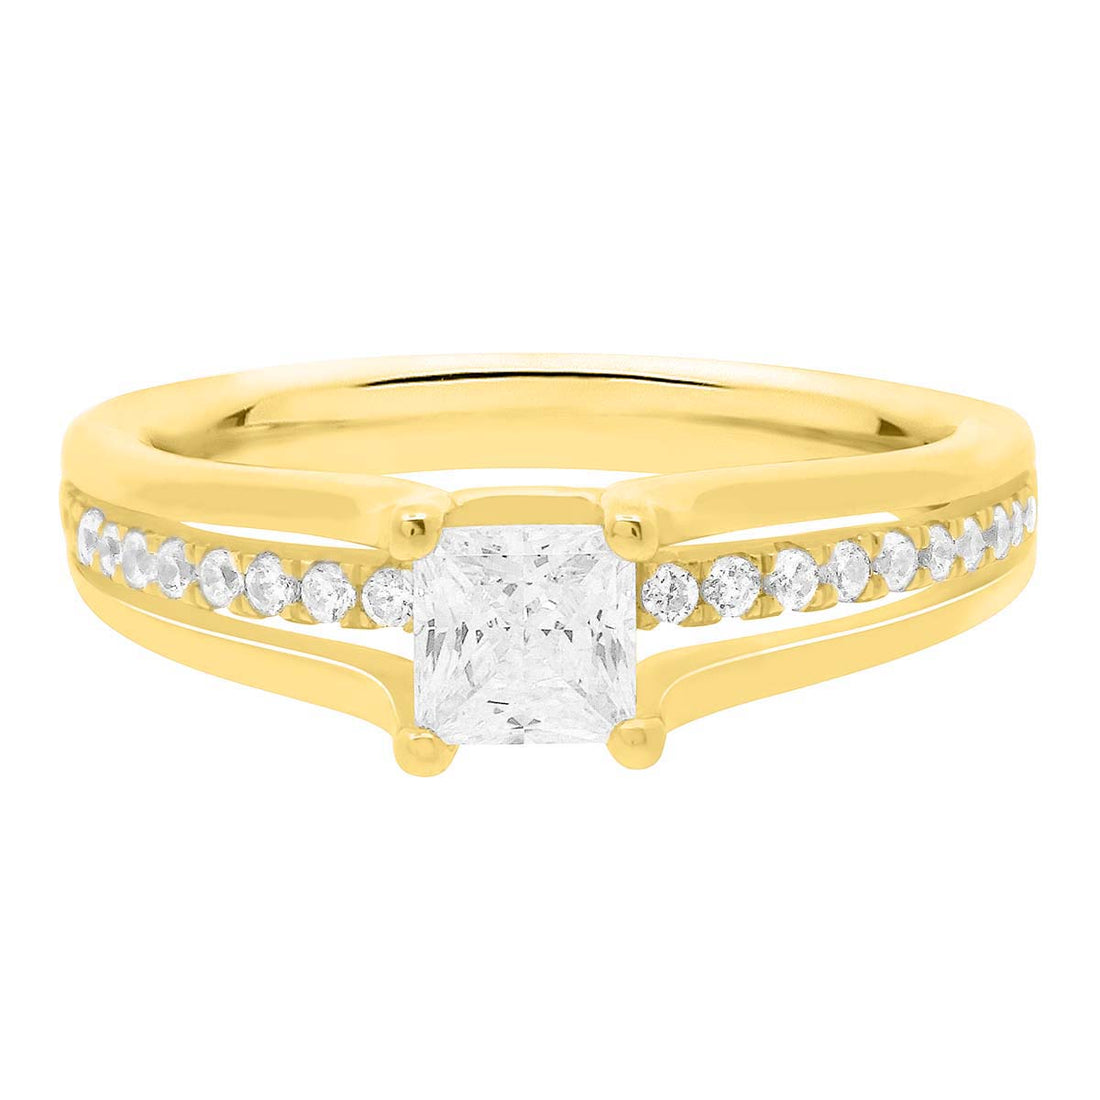 Princess Cut Diamond Engagement Ring made in yellow gold